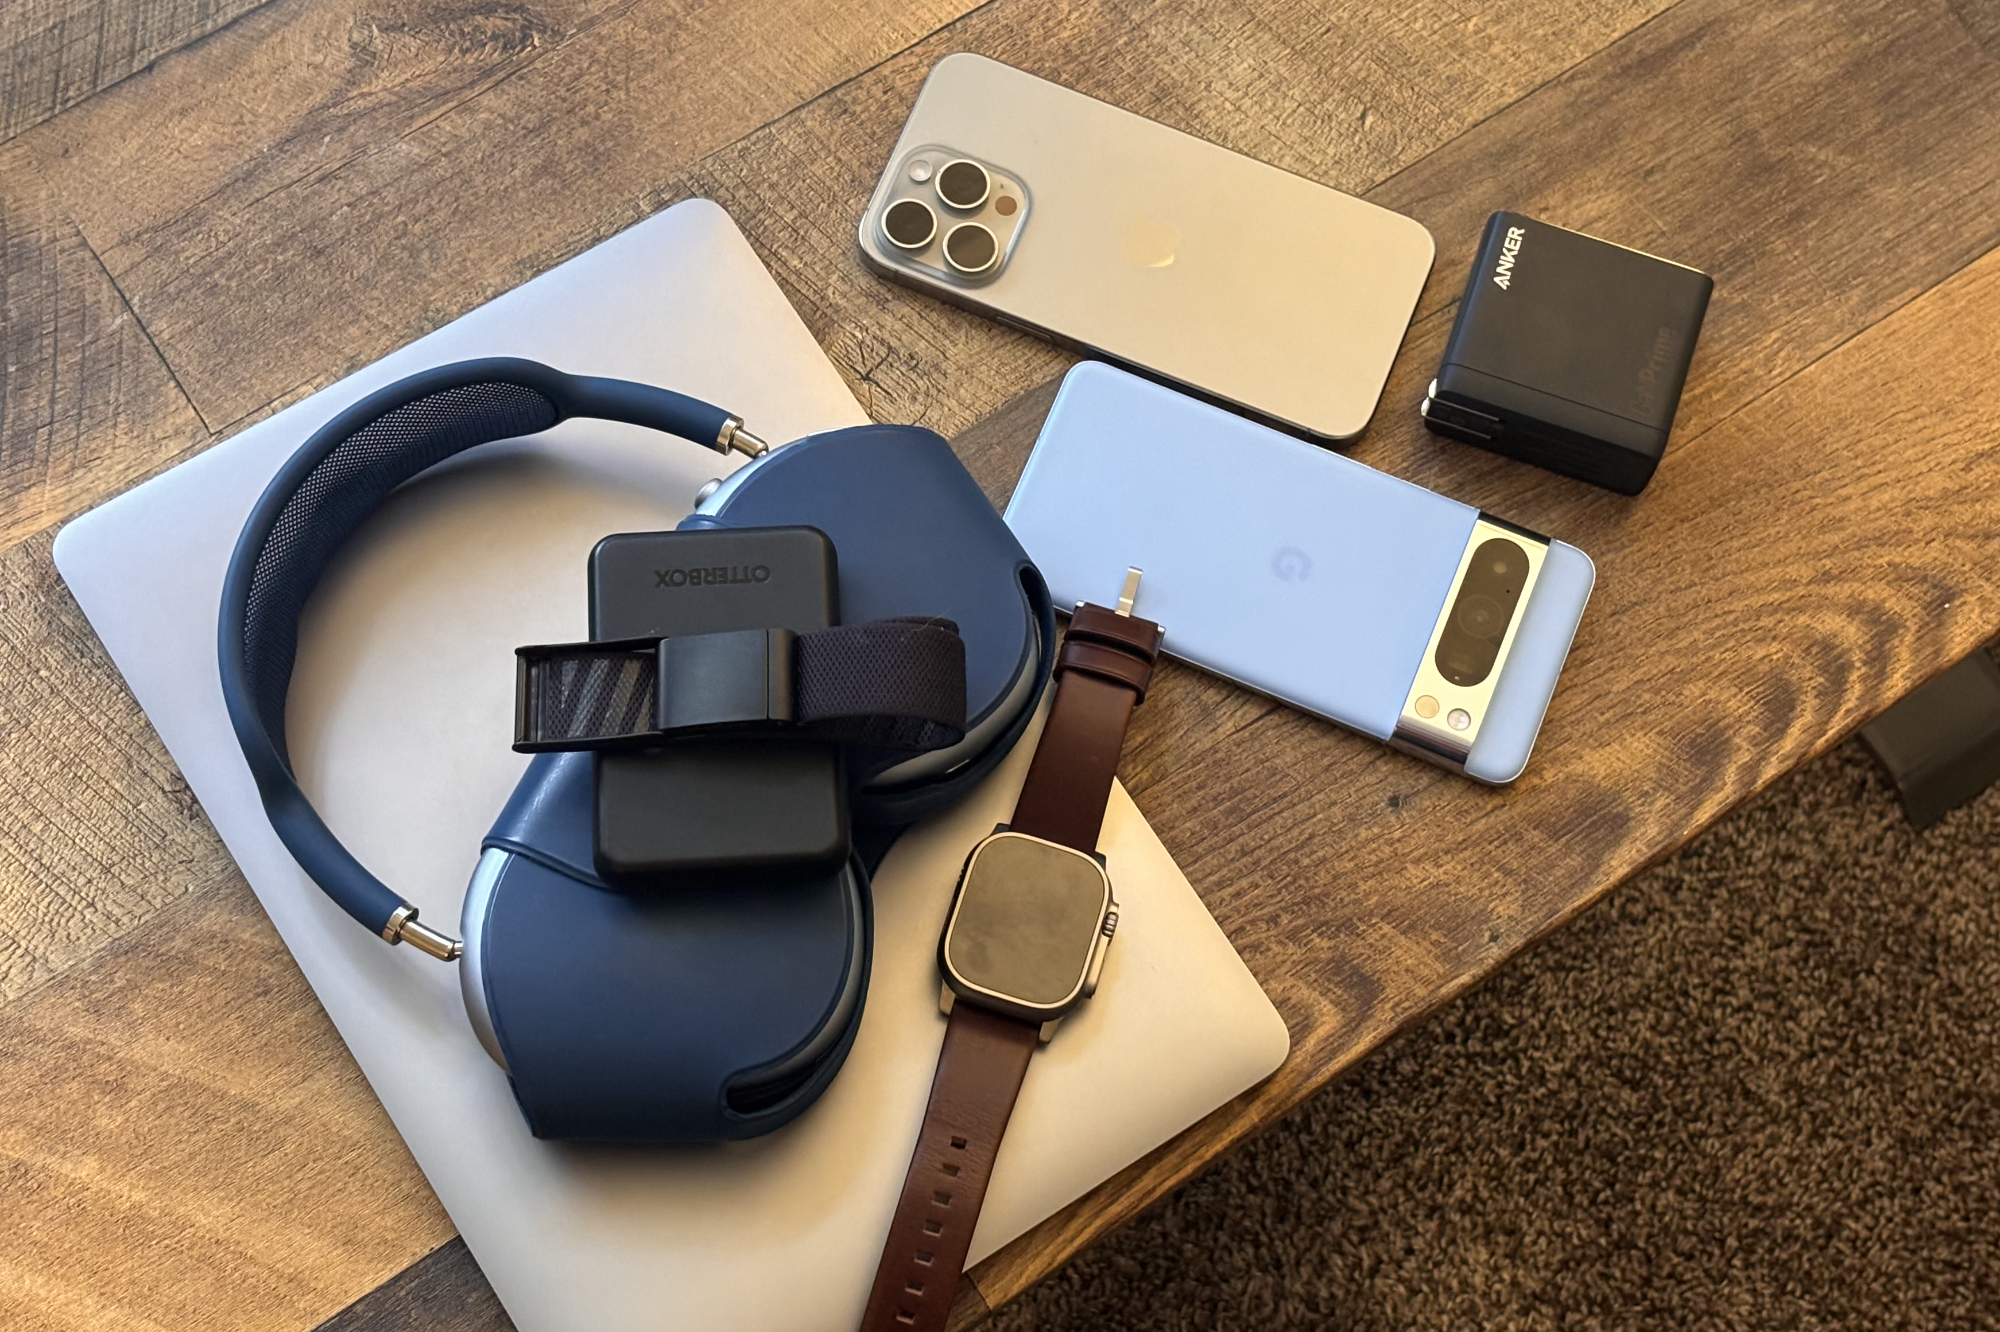 A MacBook, AirPods Max, Apple Watch, iPhone, Google Pixel, and Anker charger all lying next to each other on a desk.